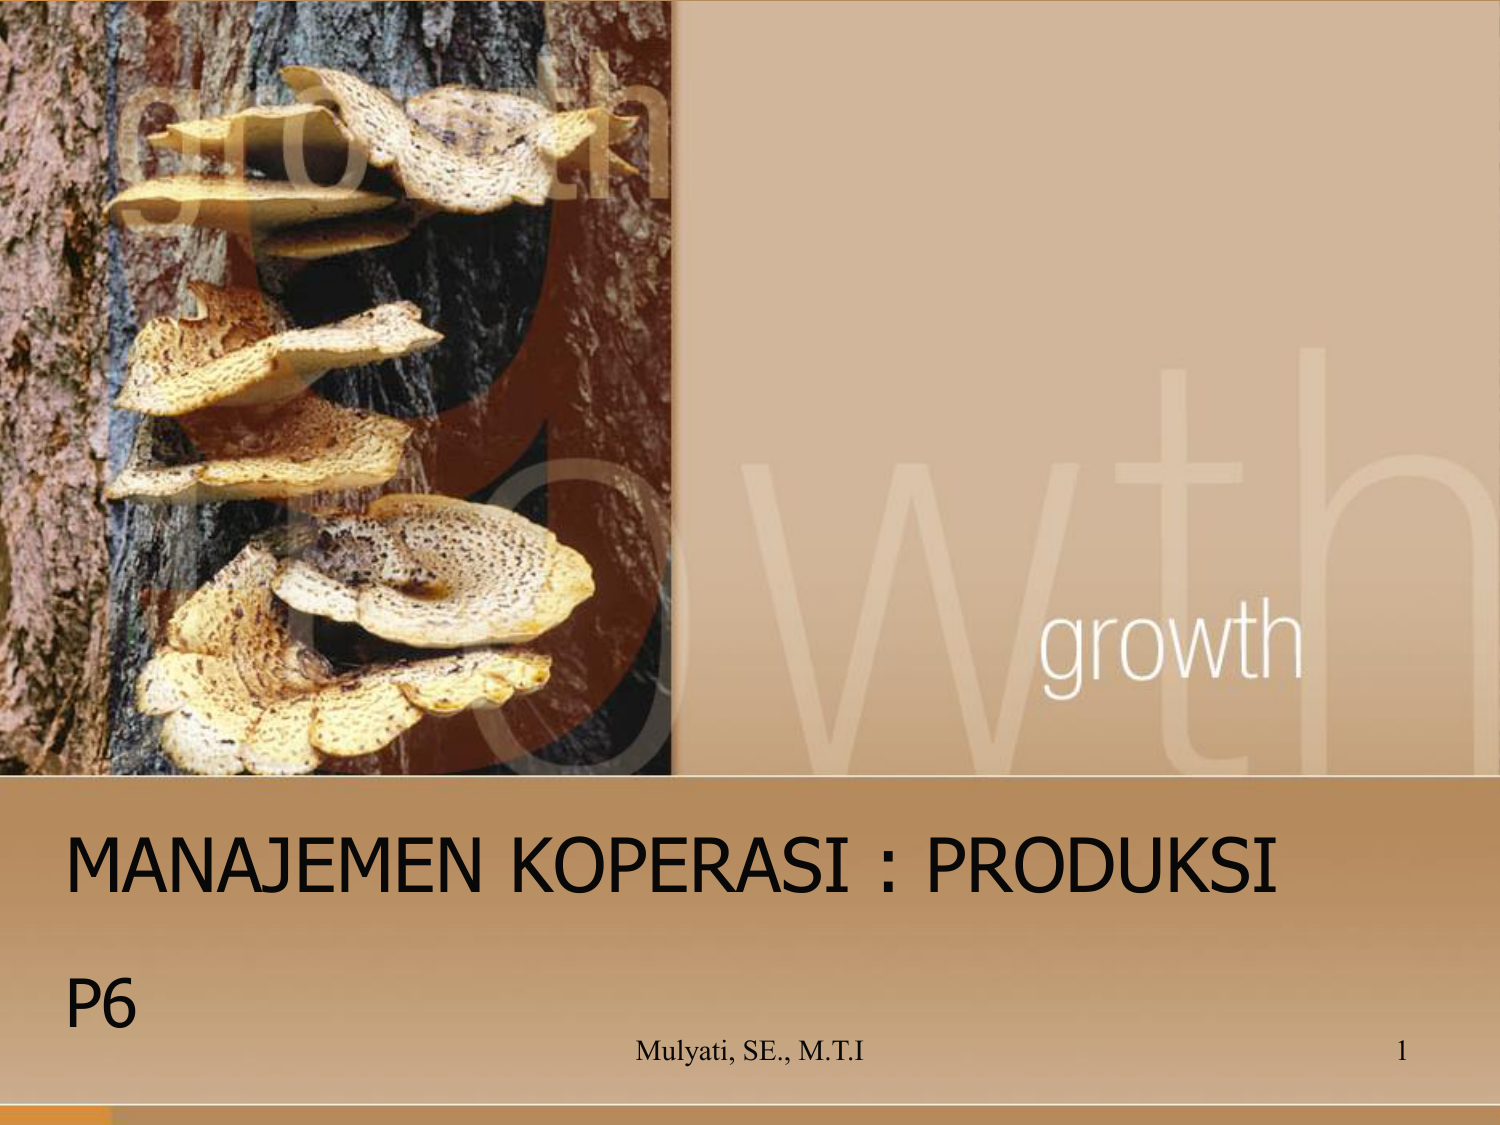 Identities discovered. Fungi Kingdom. Introduction to fungi. Growth conditions for fungi. Fungi fun guy.